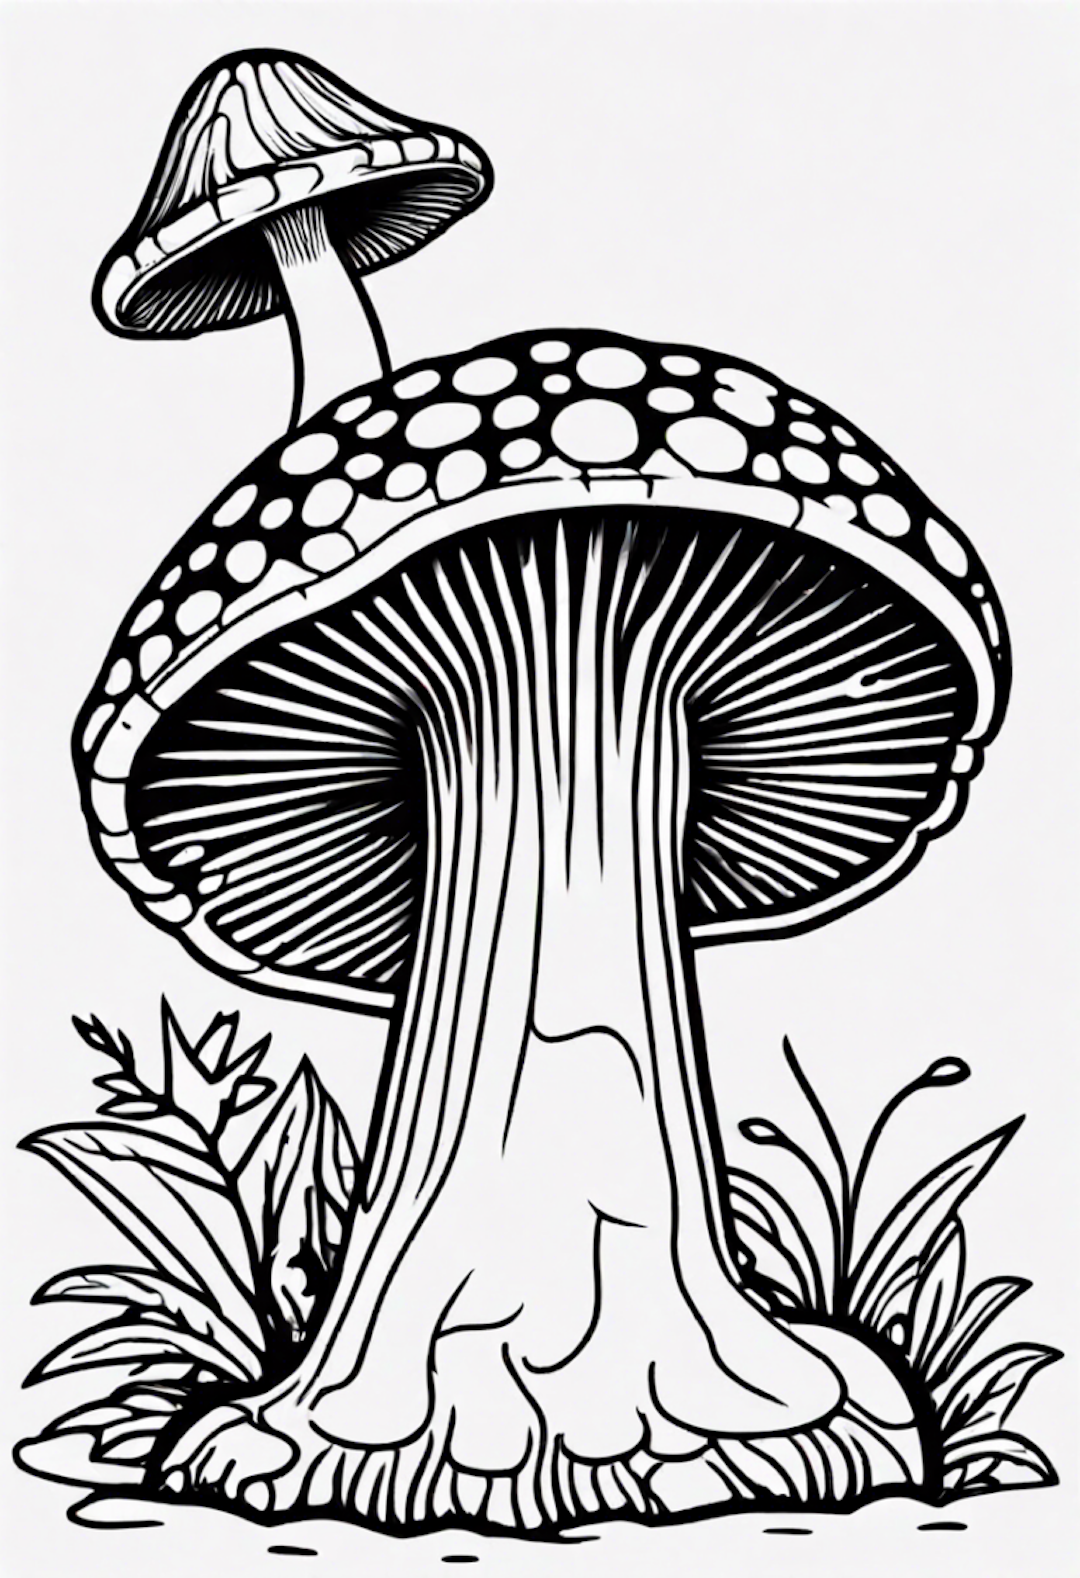 Giant Forest Mushrooms Coloring Page coloring pages